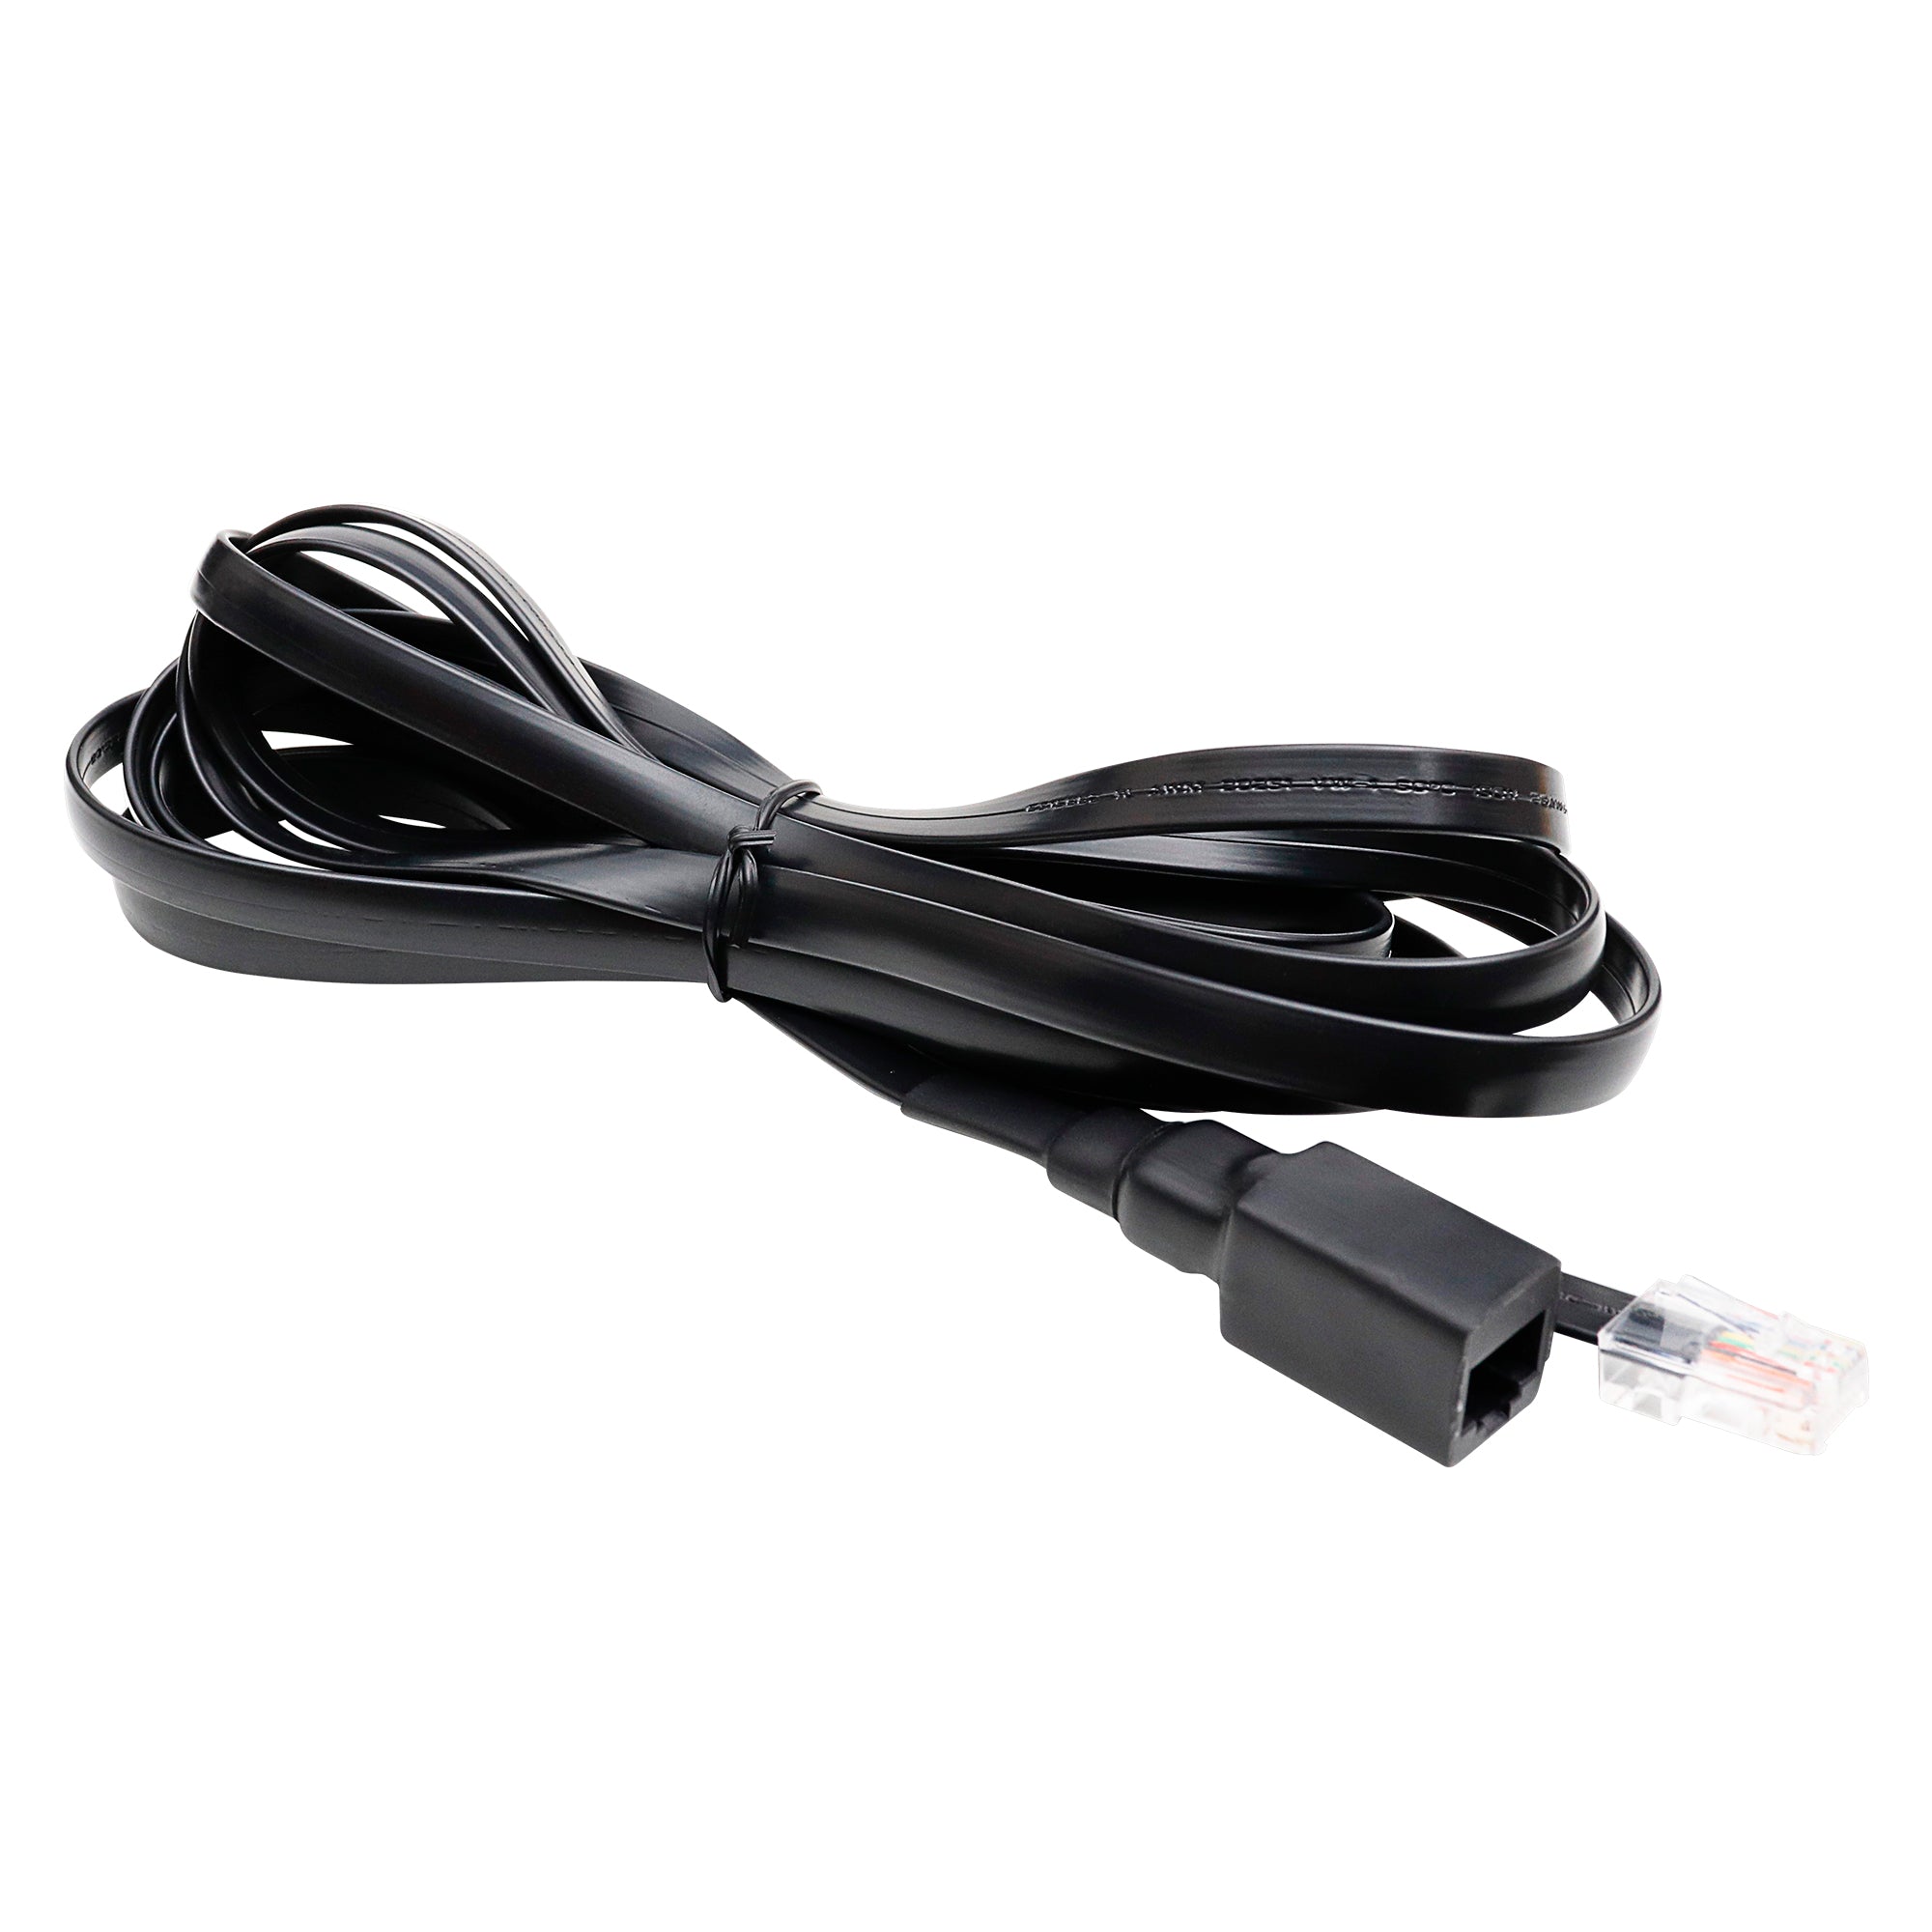 MicroMobile MXTA31 Microphone Extension Cable